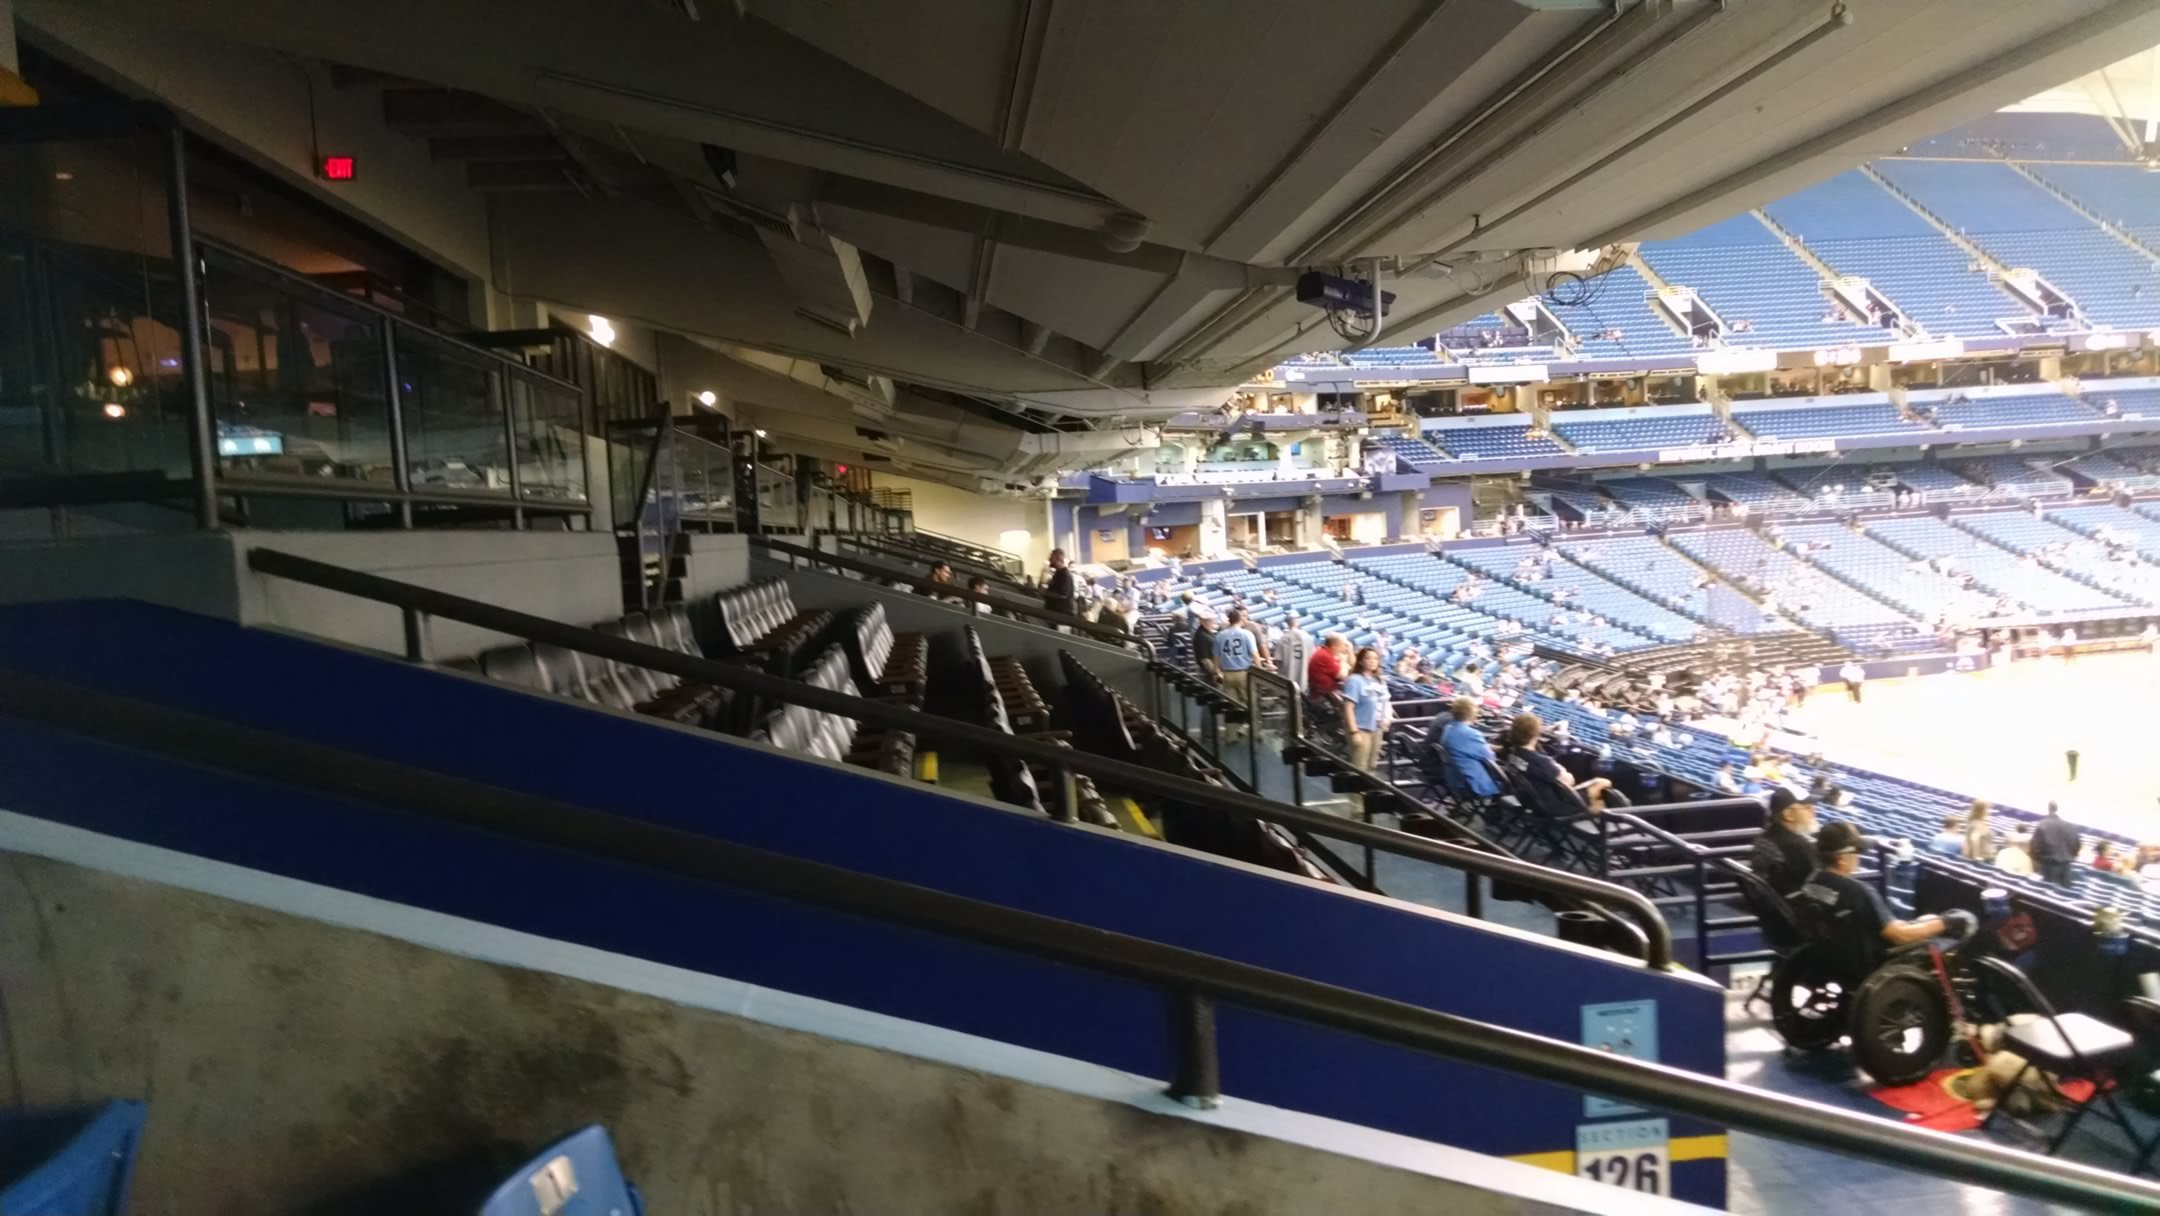 Great first visit at Tropicana Field Last Night! Love the Roof Colors! :  r/tampabayrays